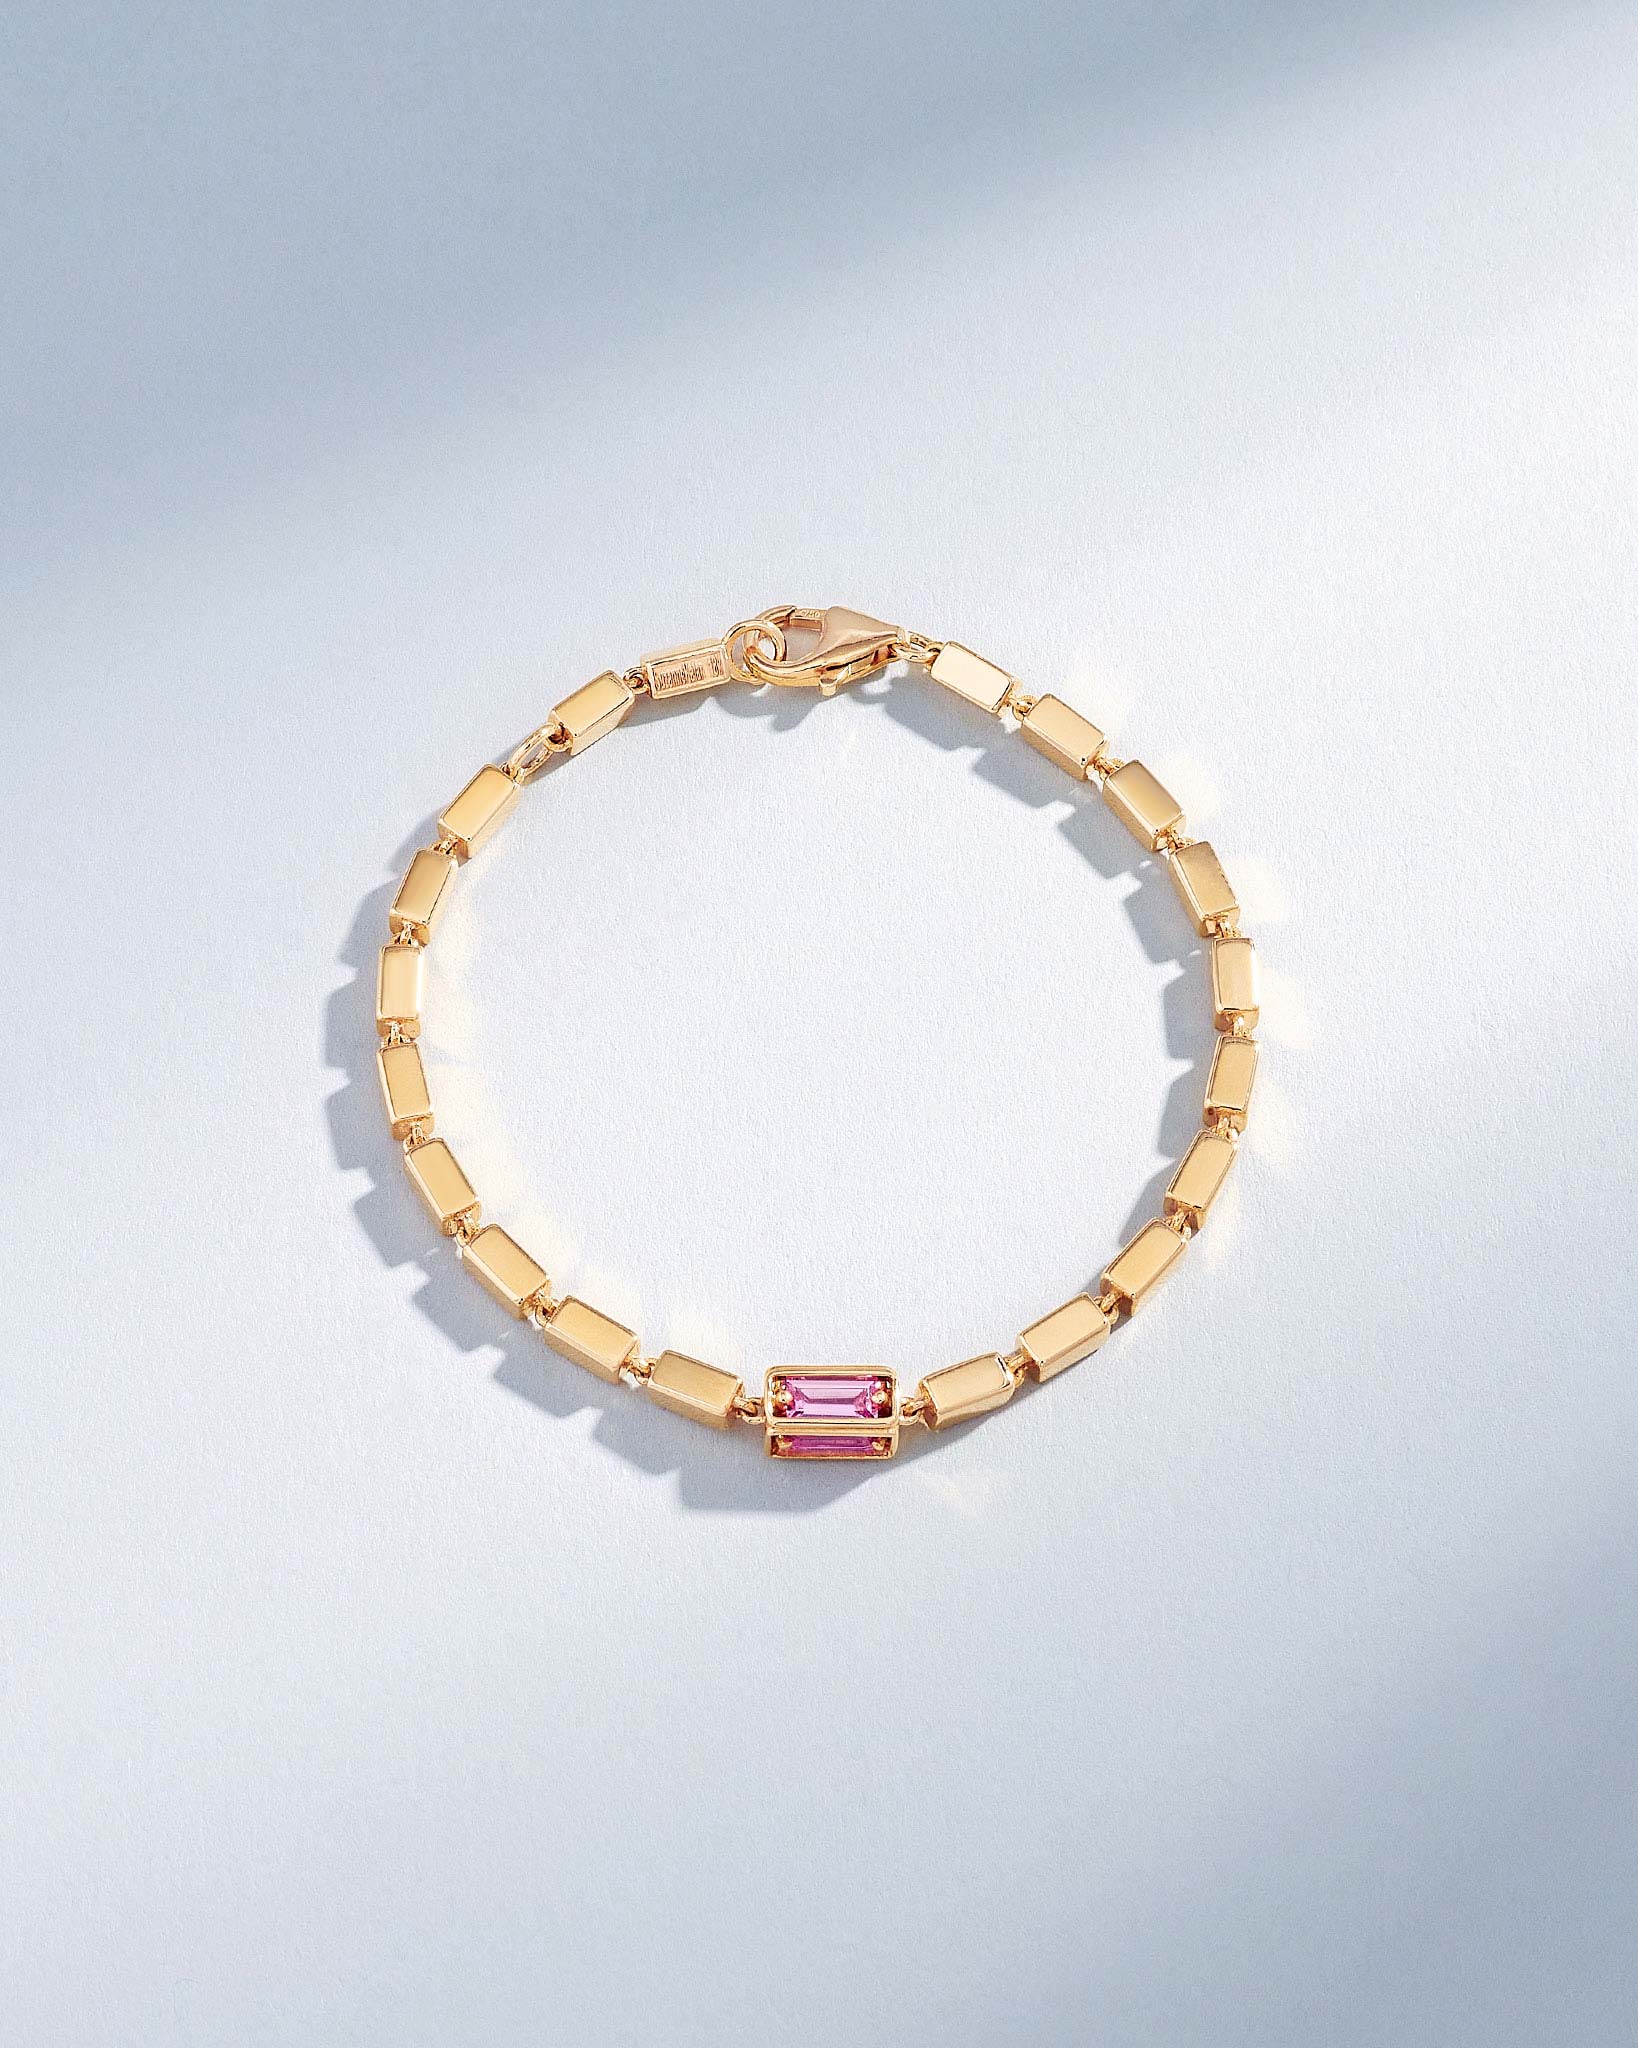 Suzanne Kalan Block-Chain Single Pink Sapphire Thick Bracelet in 18k yellow gold